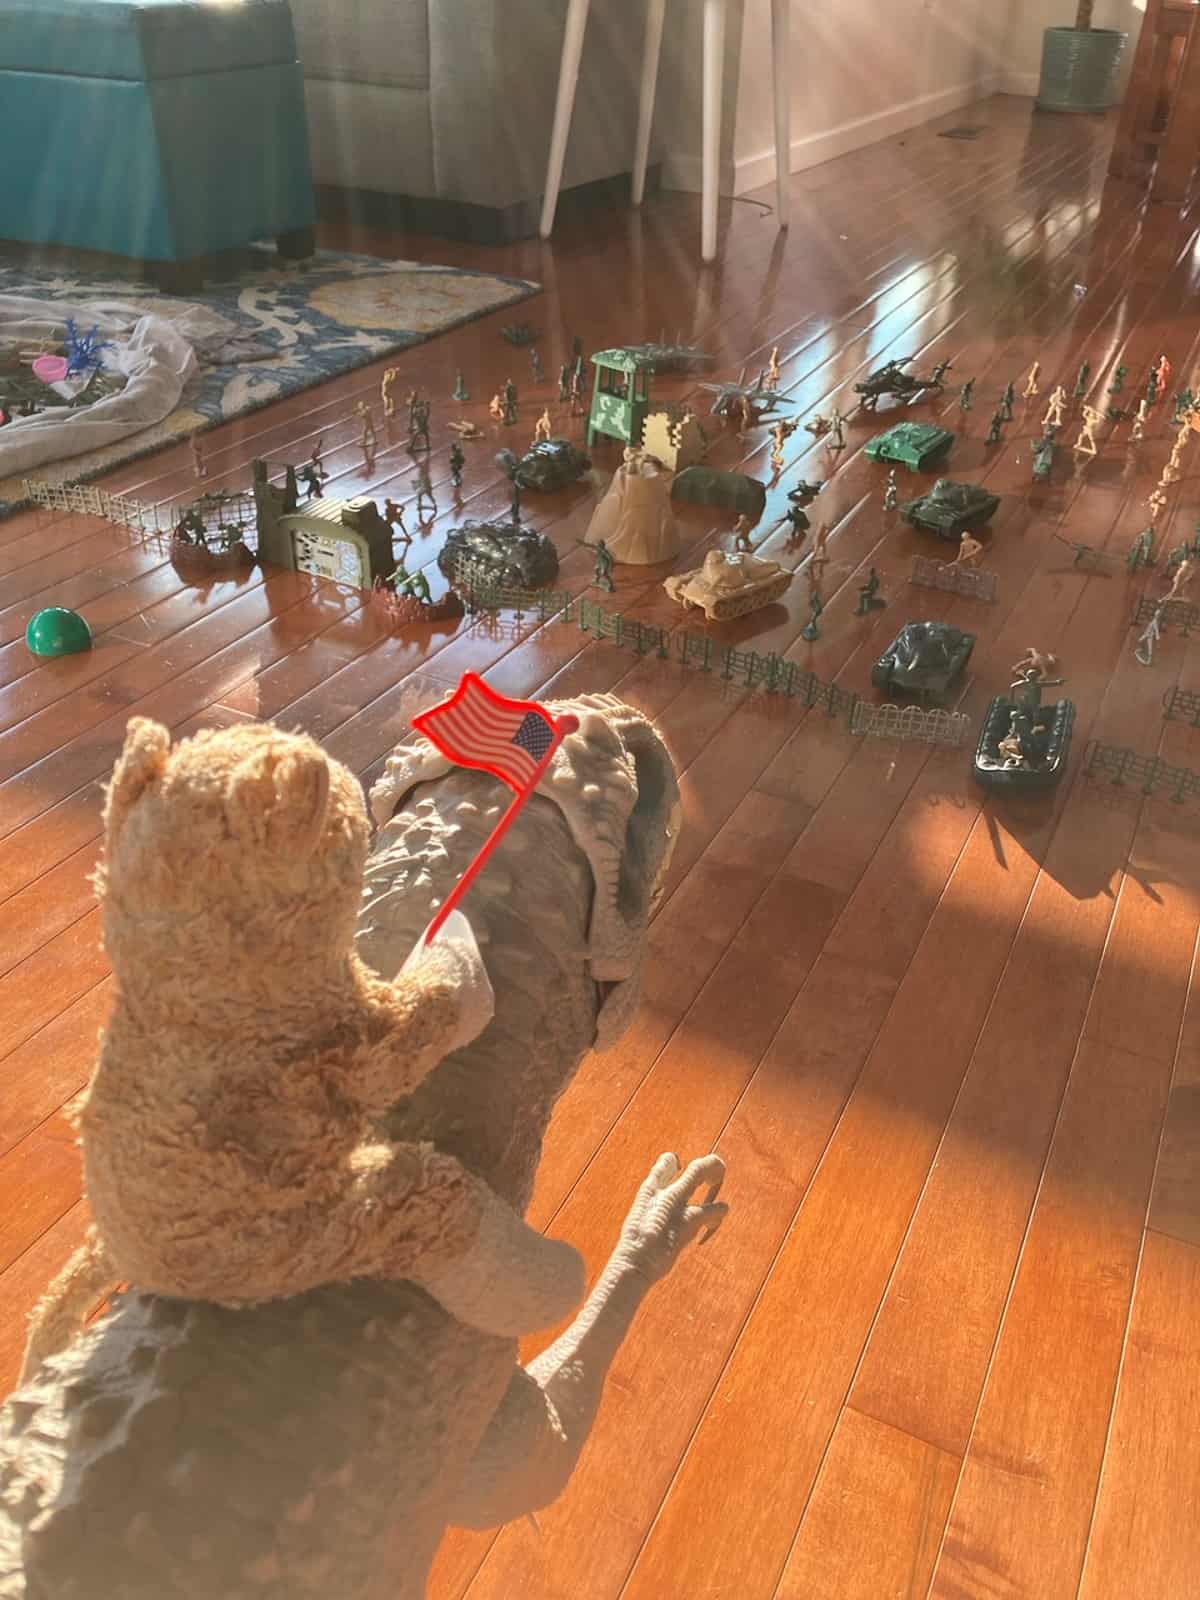 a stuffed cat on a toy dino in front of a line of army soliders.